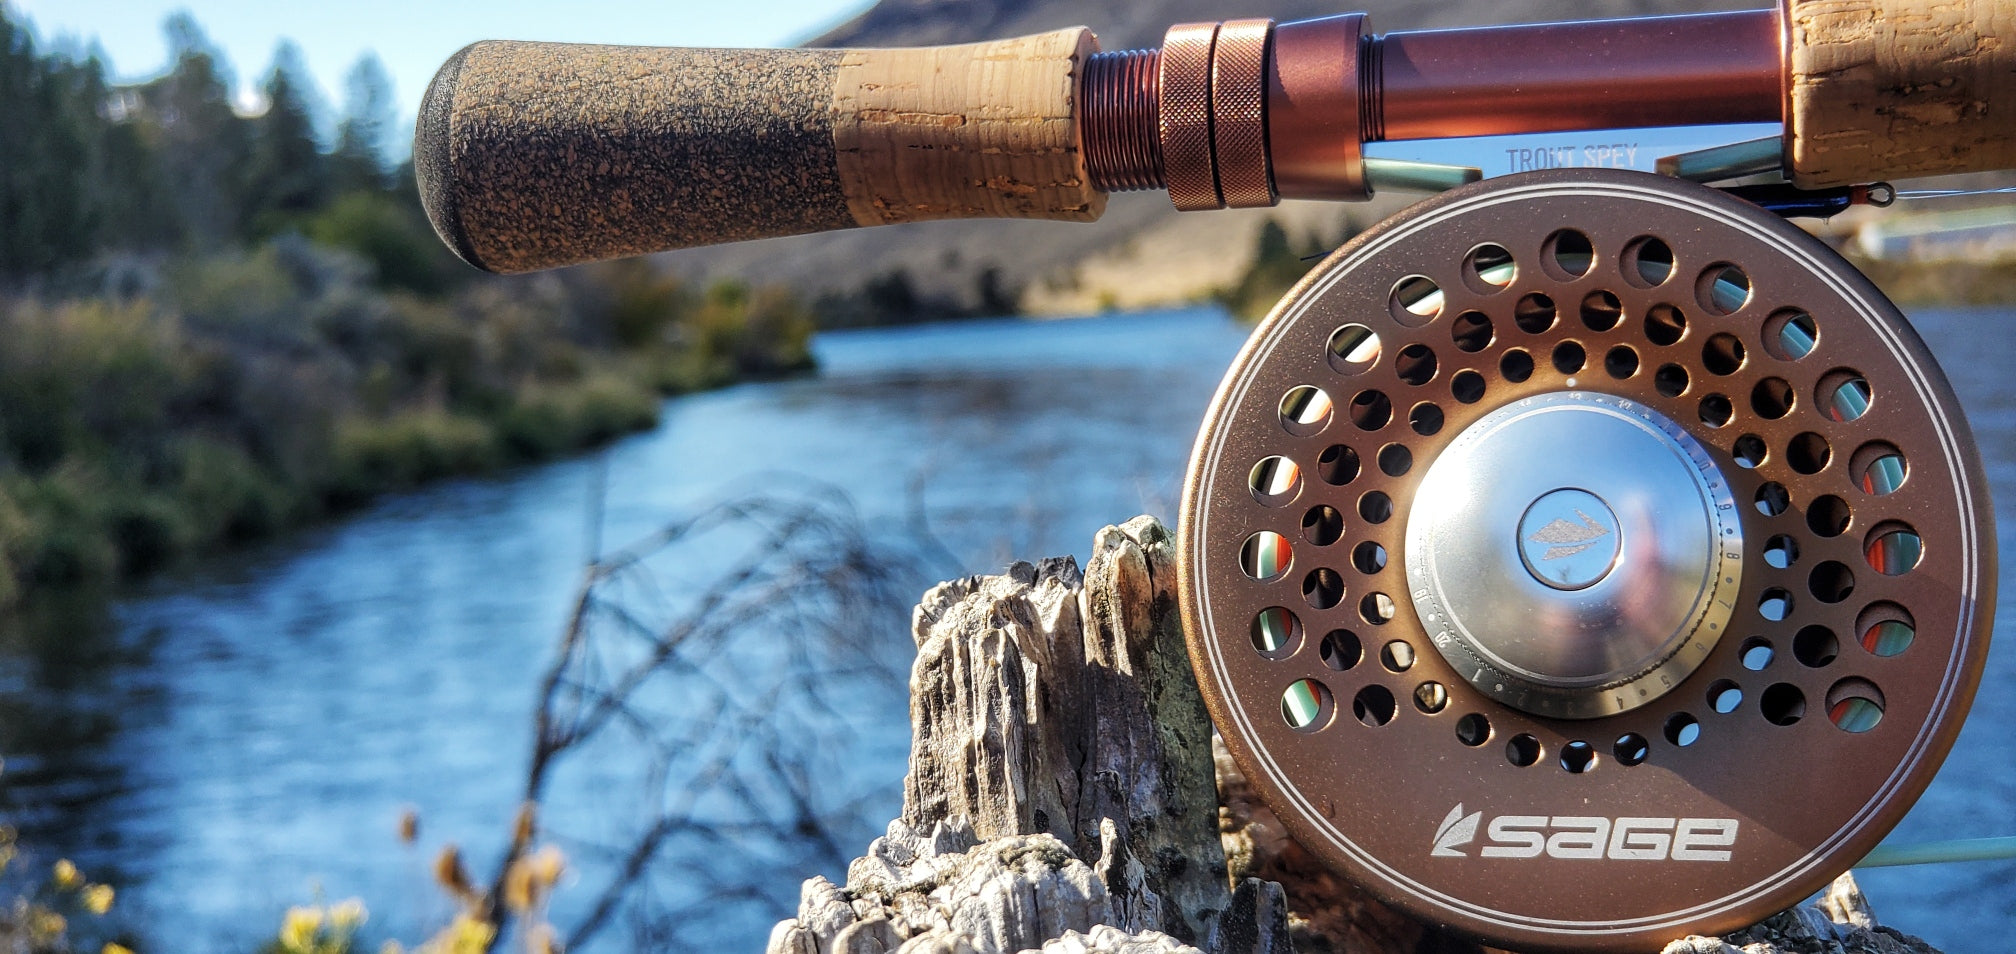 TROUT SPEY REELS — Red's Fly Shop